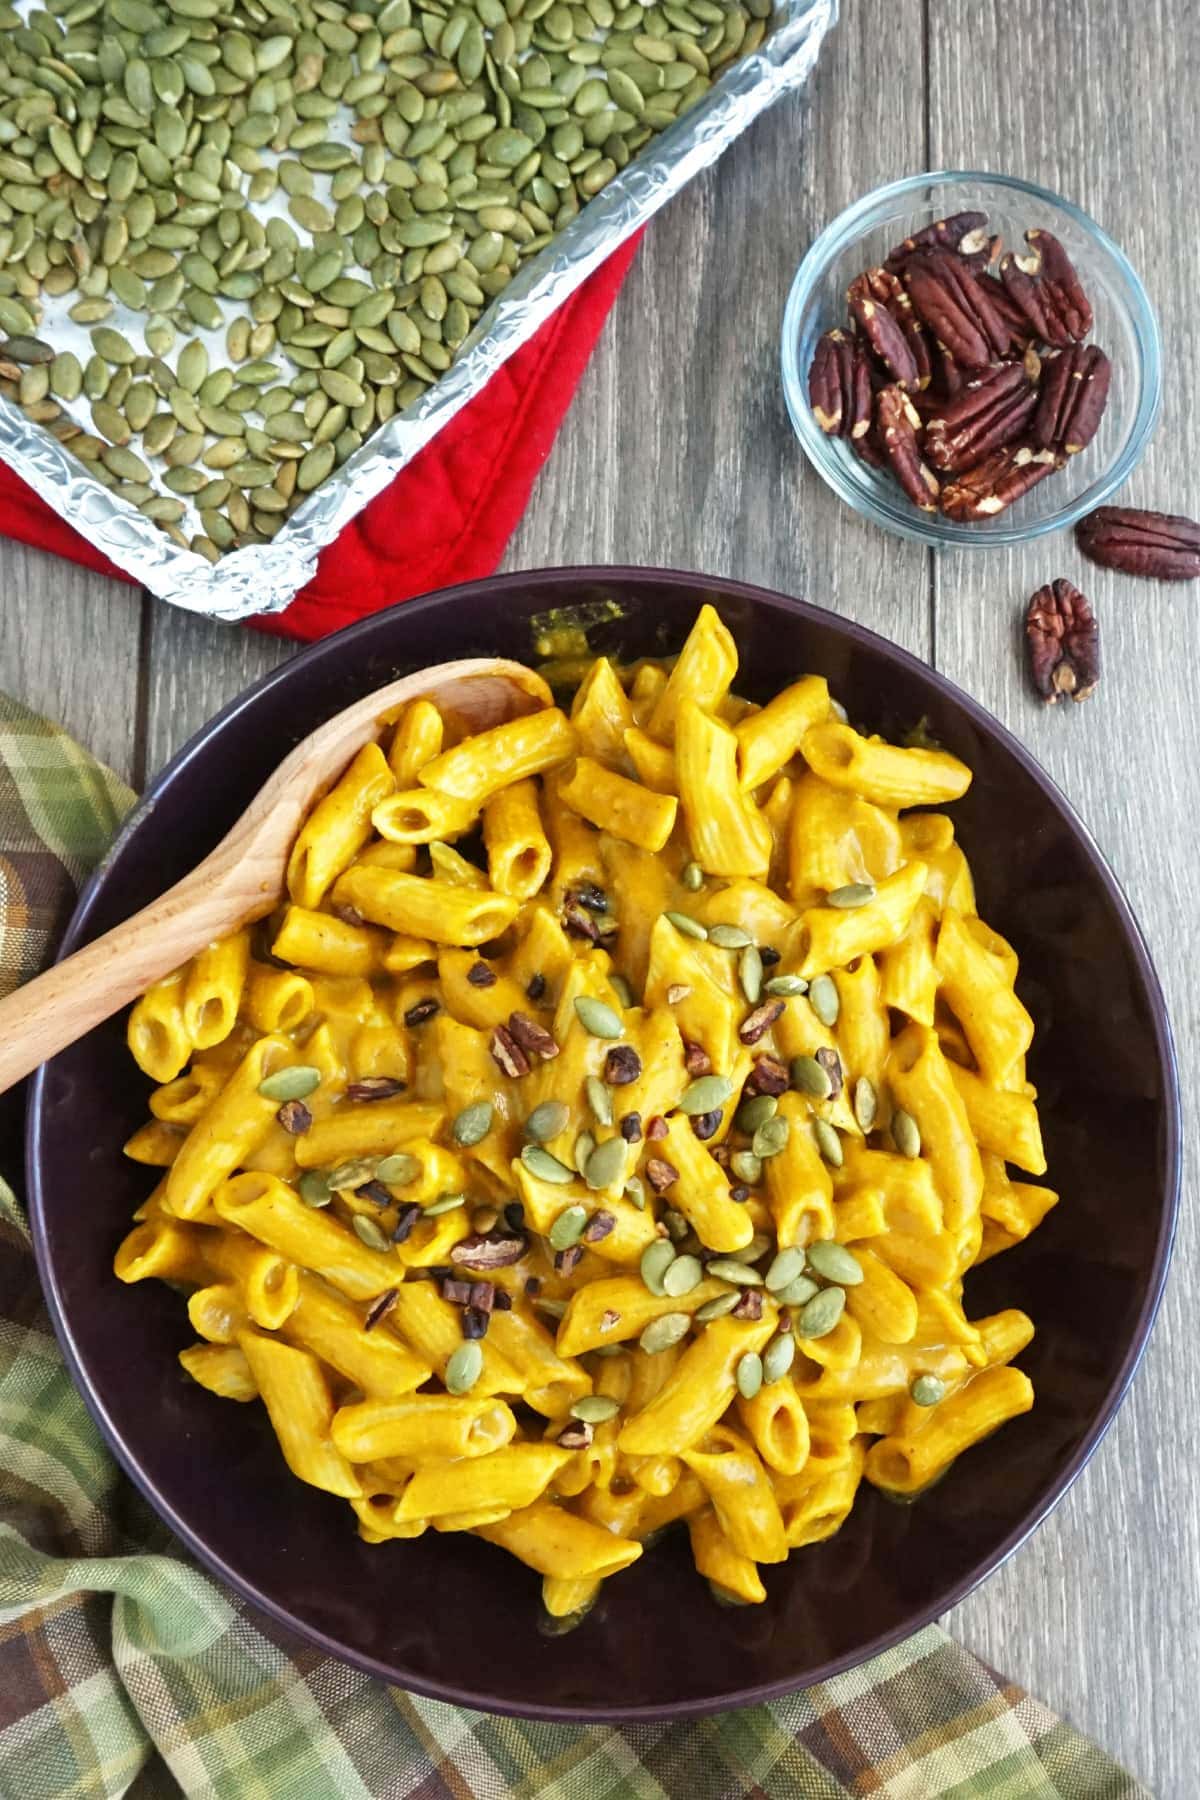 Serving dish of pasta with roasted pumpkin seeds in the background